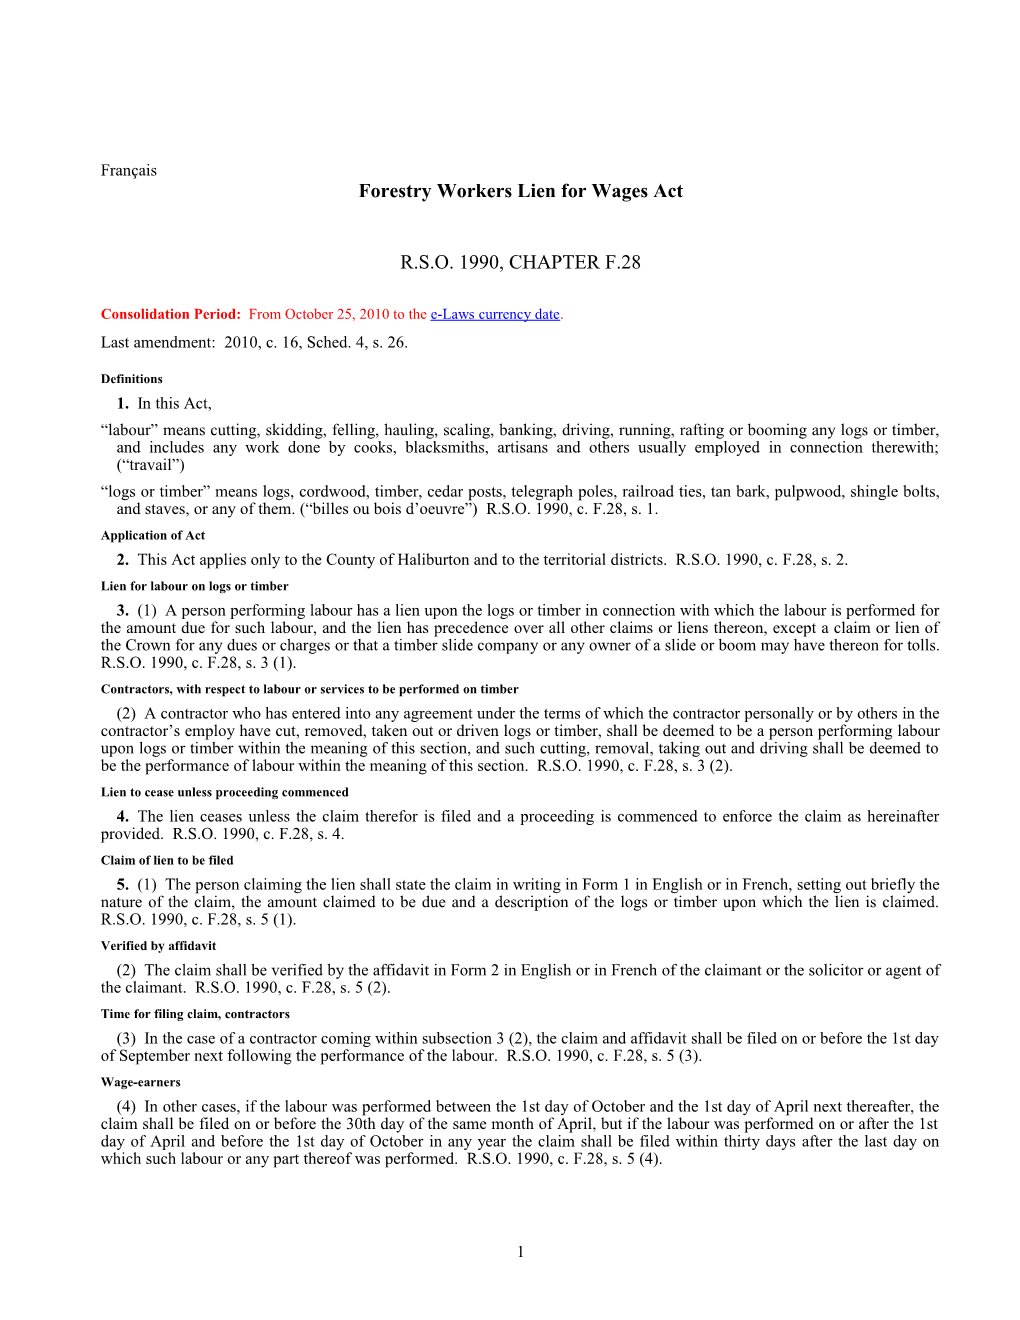 Forestry Workers Lien for Wages Act, R.S.O. 1990, C. F.28